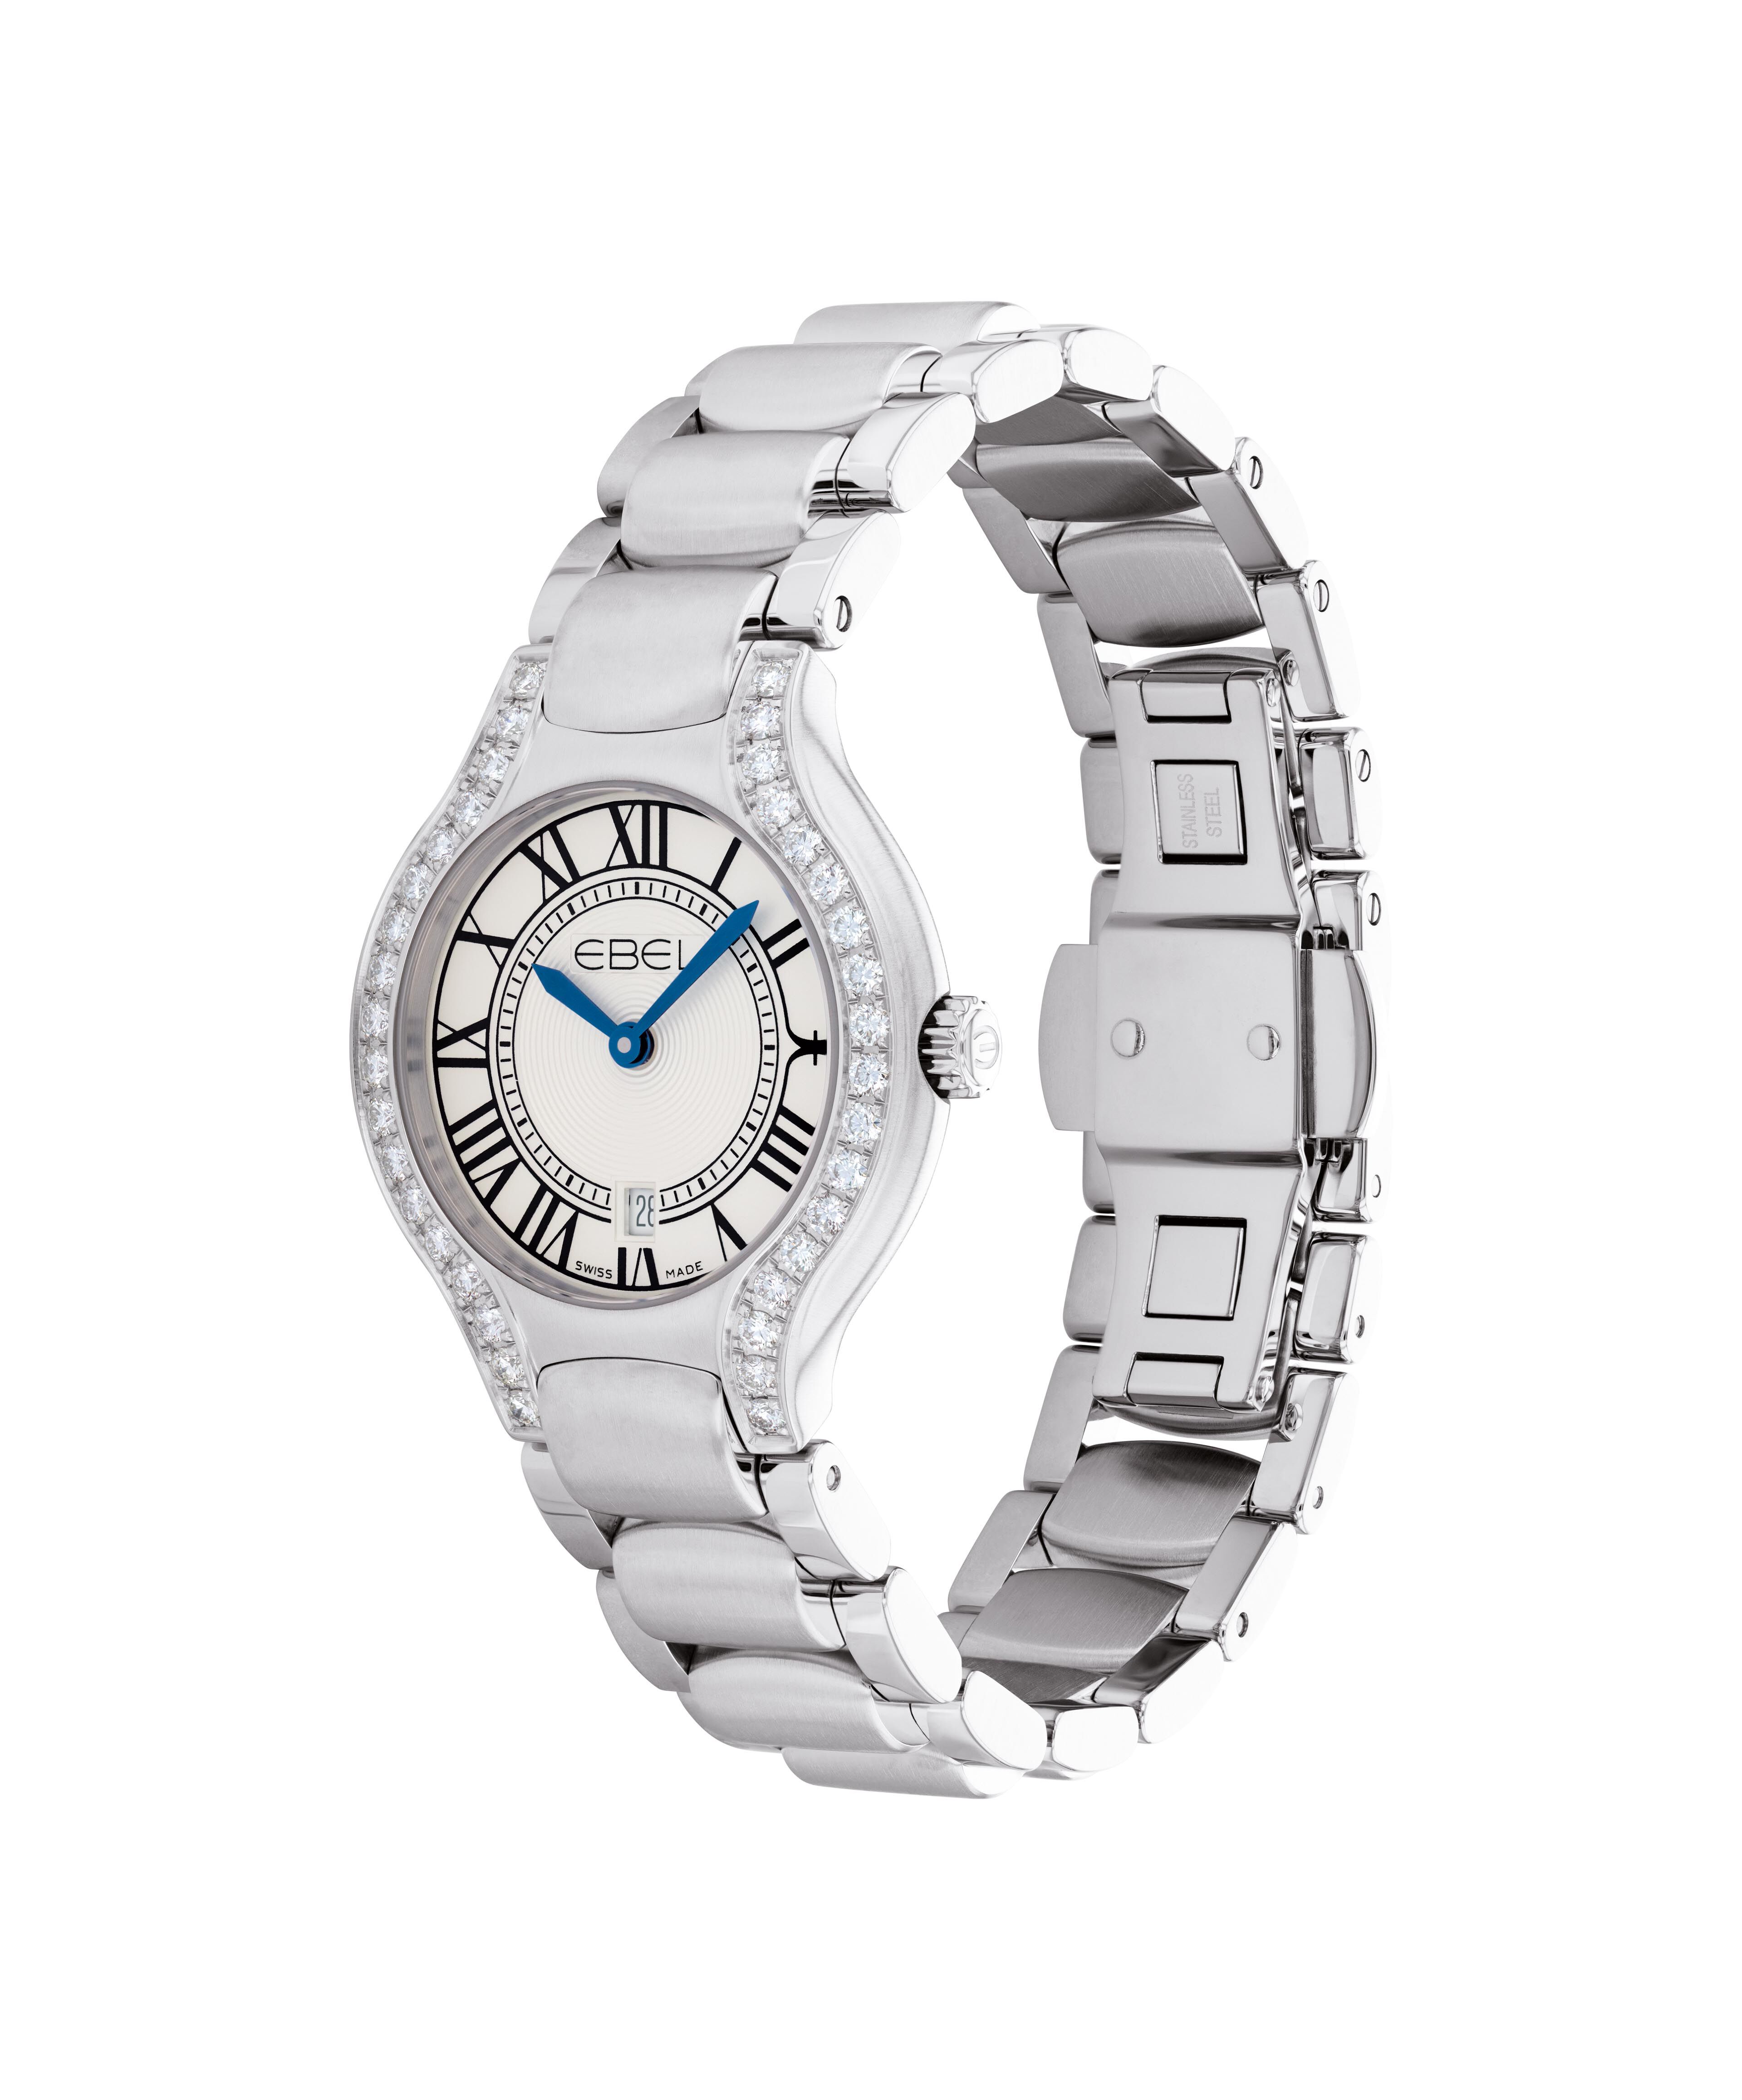 EBEL | Women's Watch Beluga Lady, stainless steel case with 